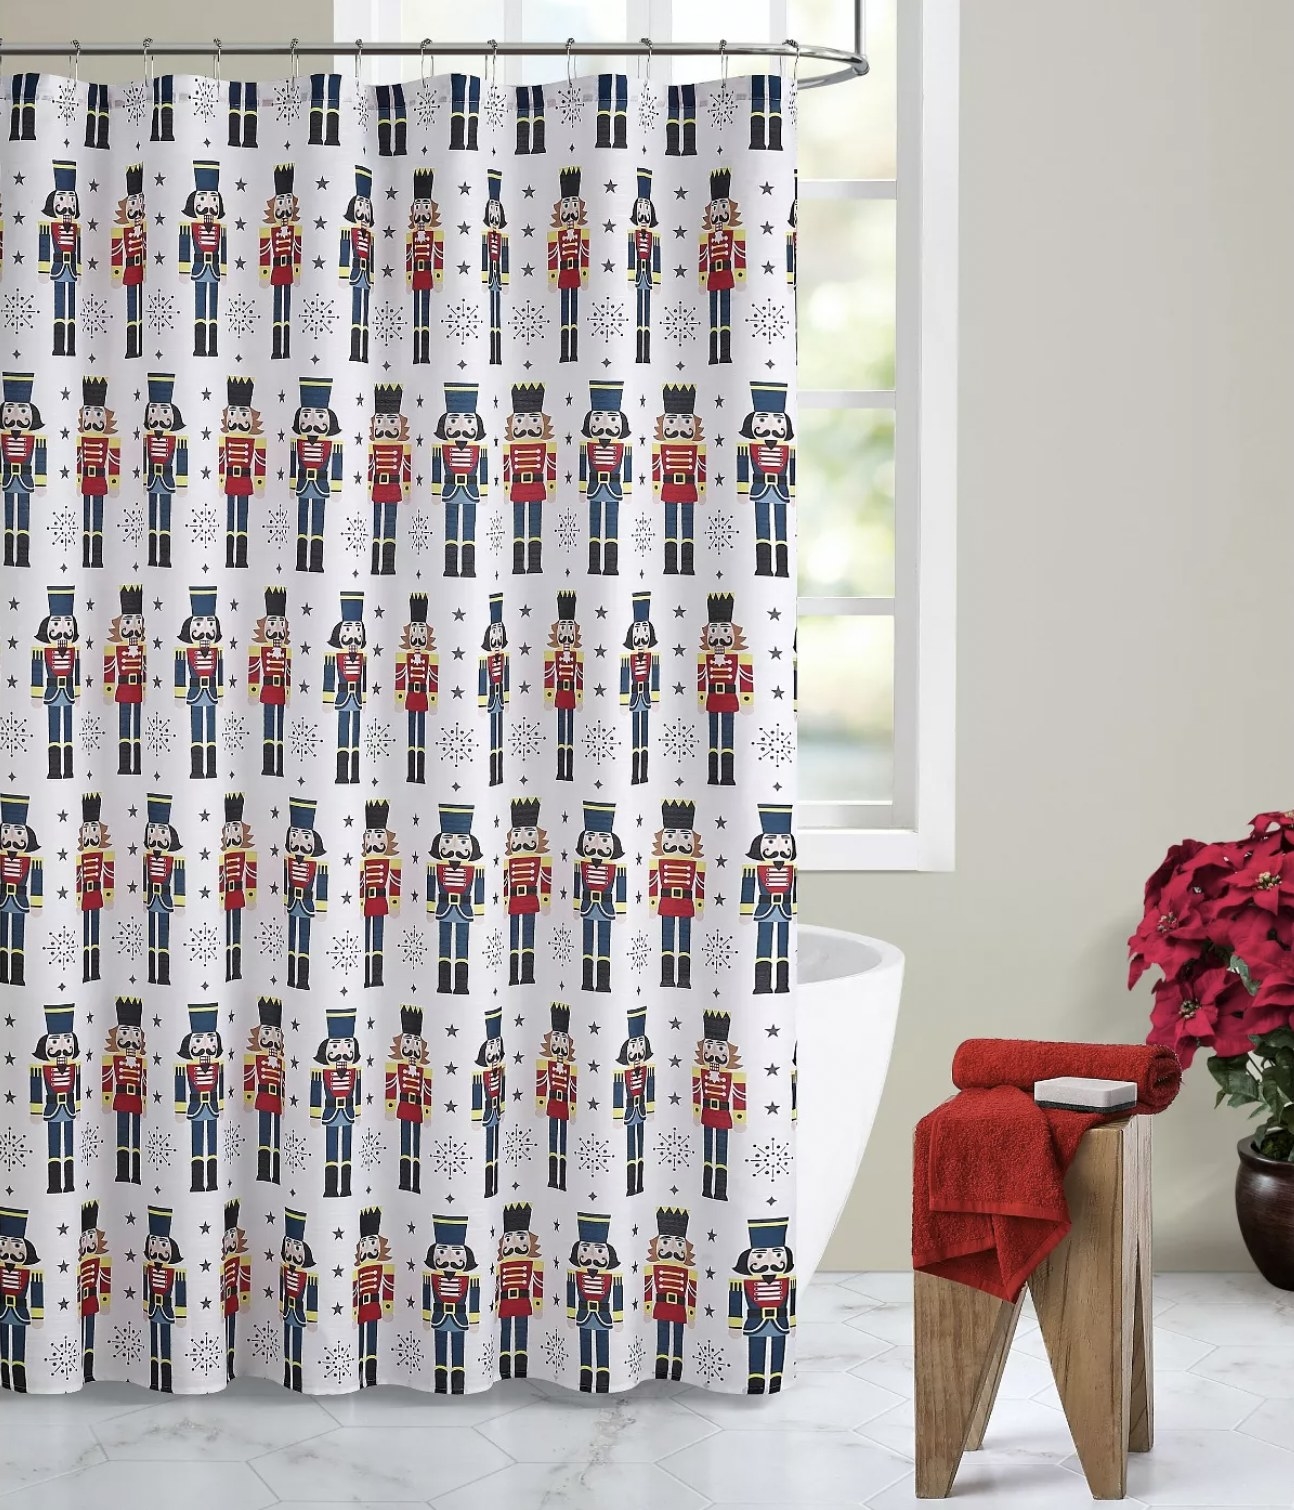 The shower curtain adorned with nutcrackers